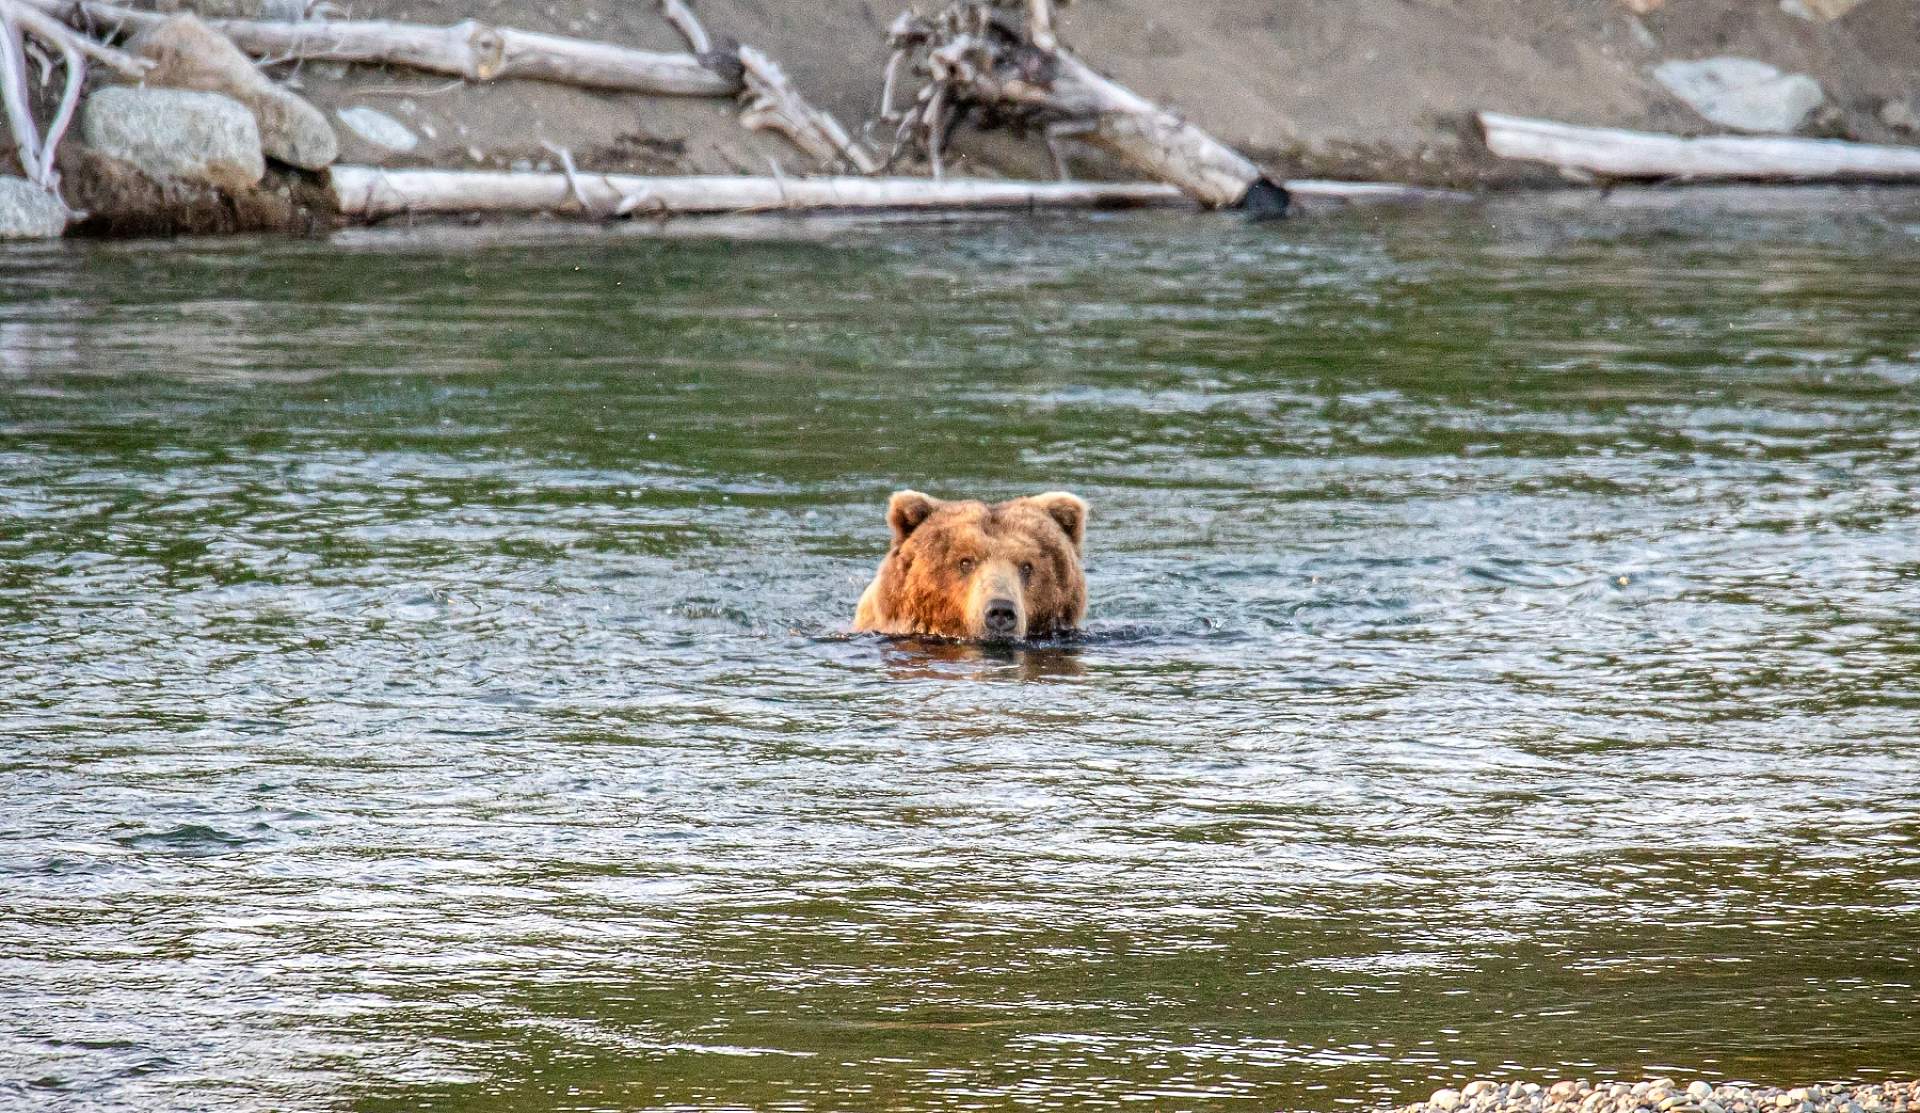 A bear peers out over the water in Katmai National Park